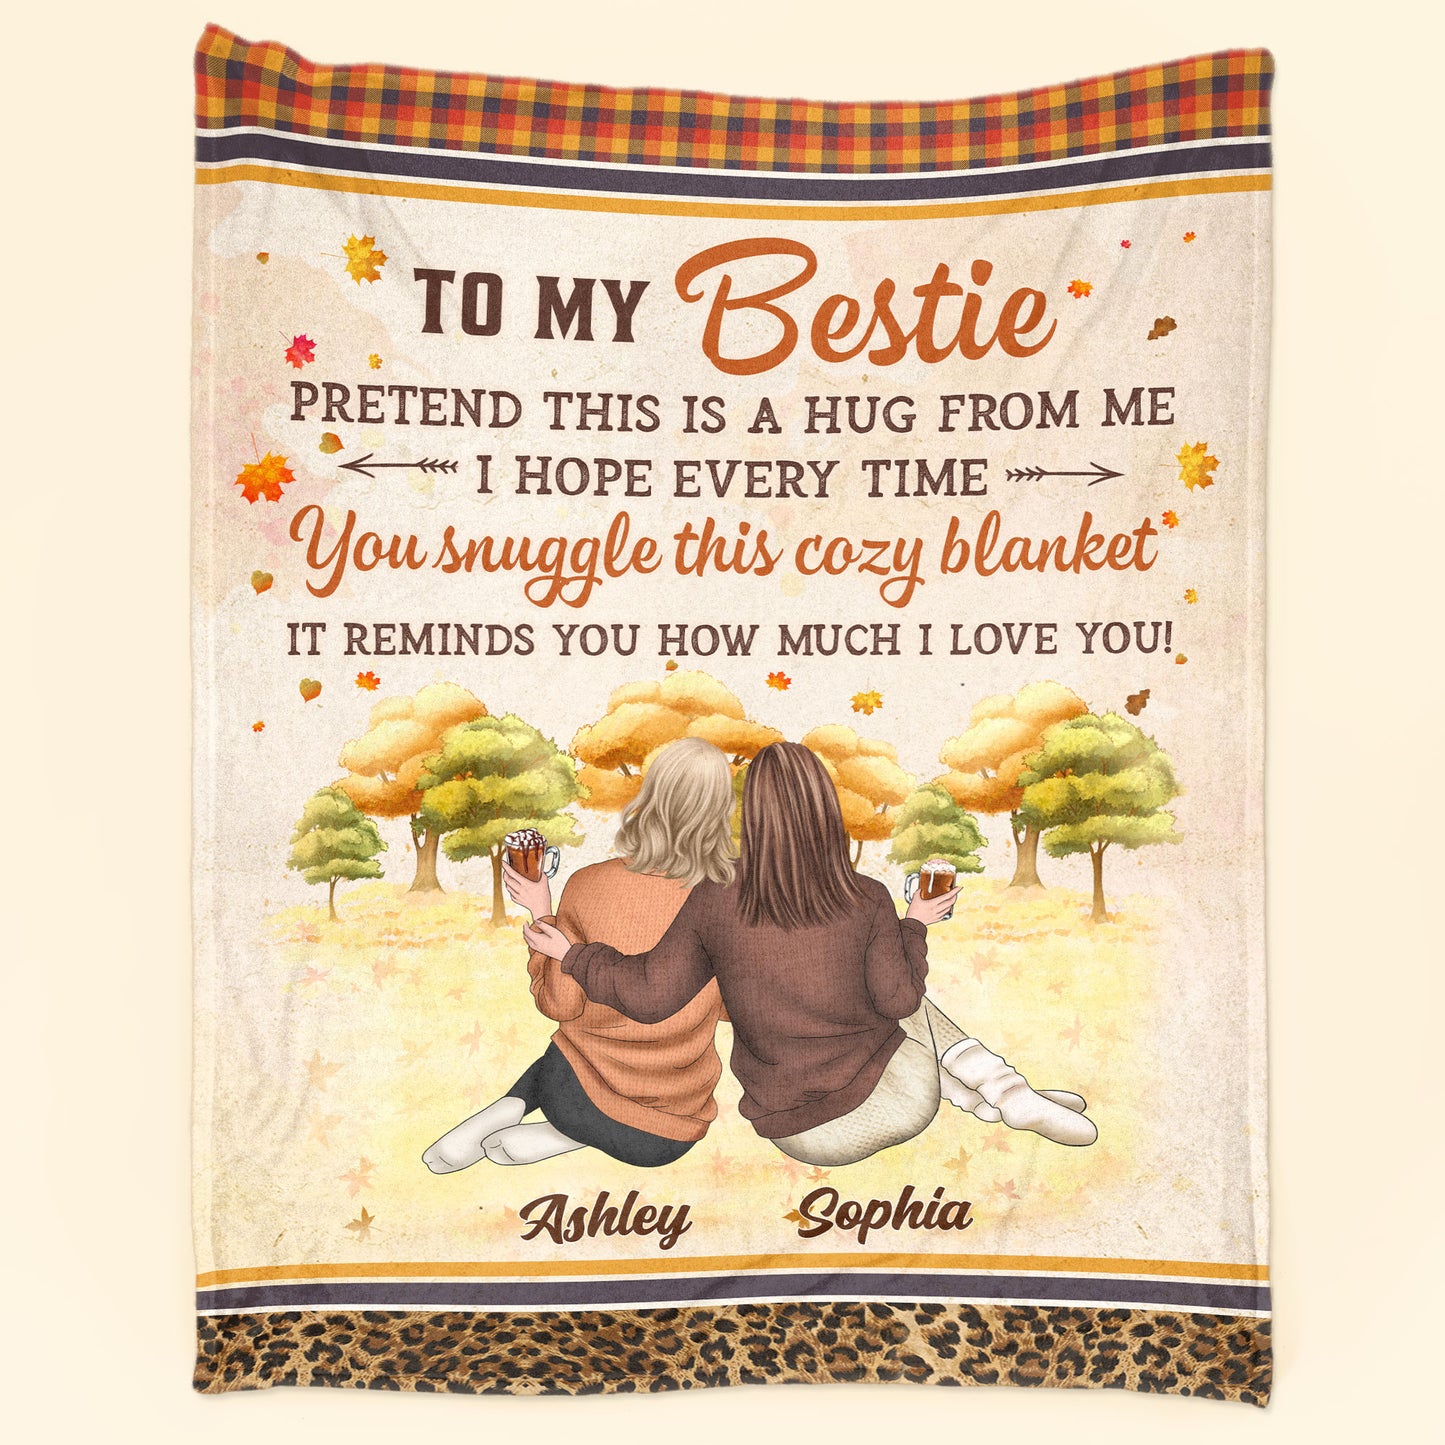 Pretend This Is A Hug From Me - Personalized Blanket - Fall season, Birthday, Autumn Gift For Besties, Best Friends, Soul Sisters